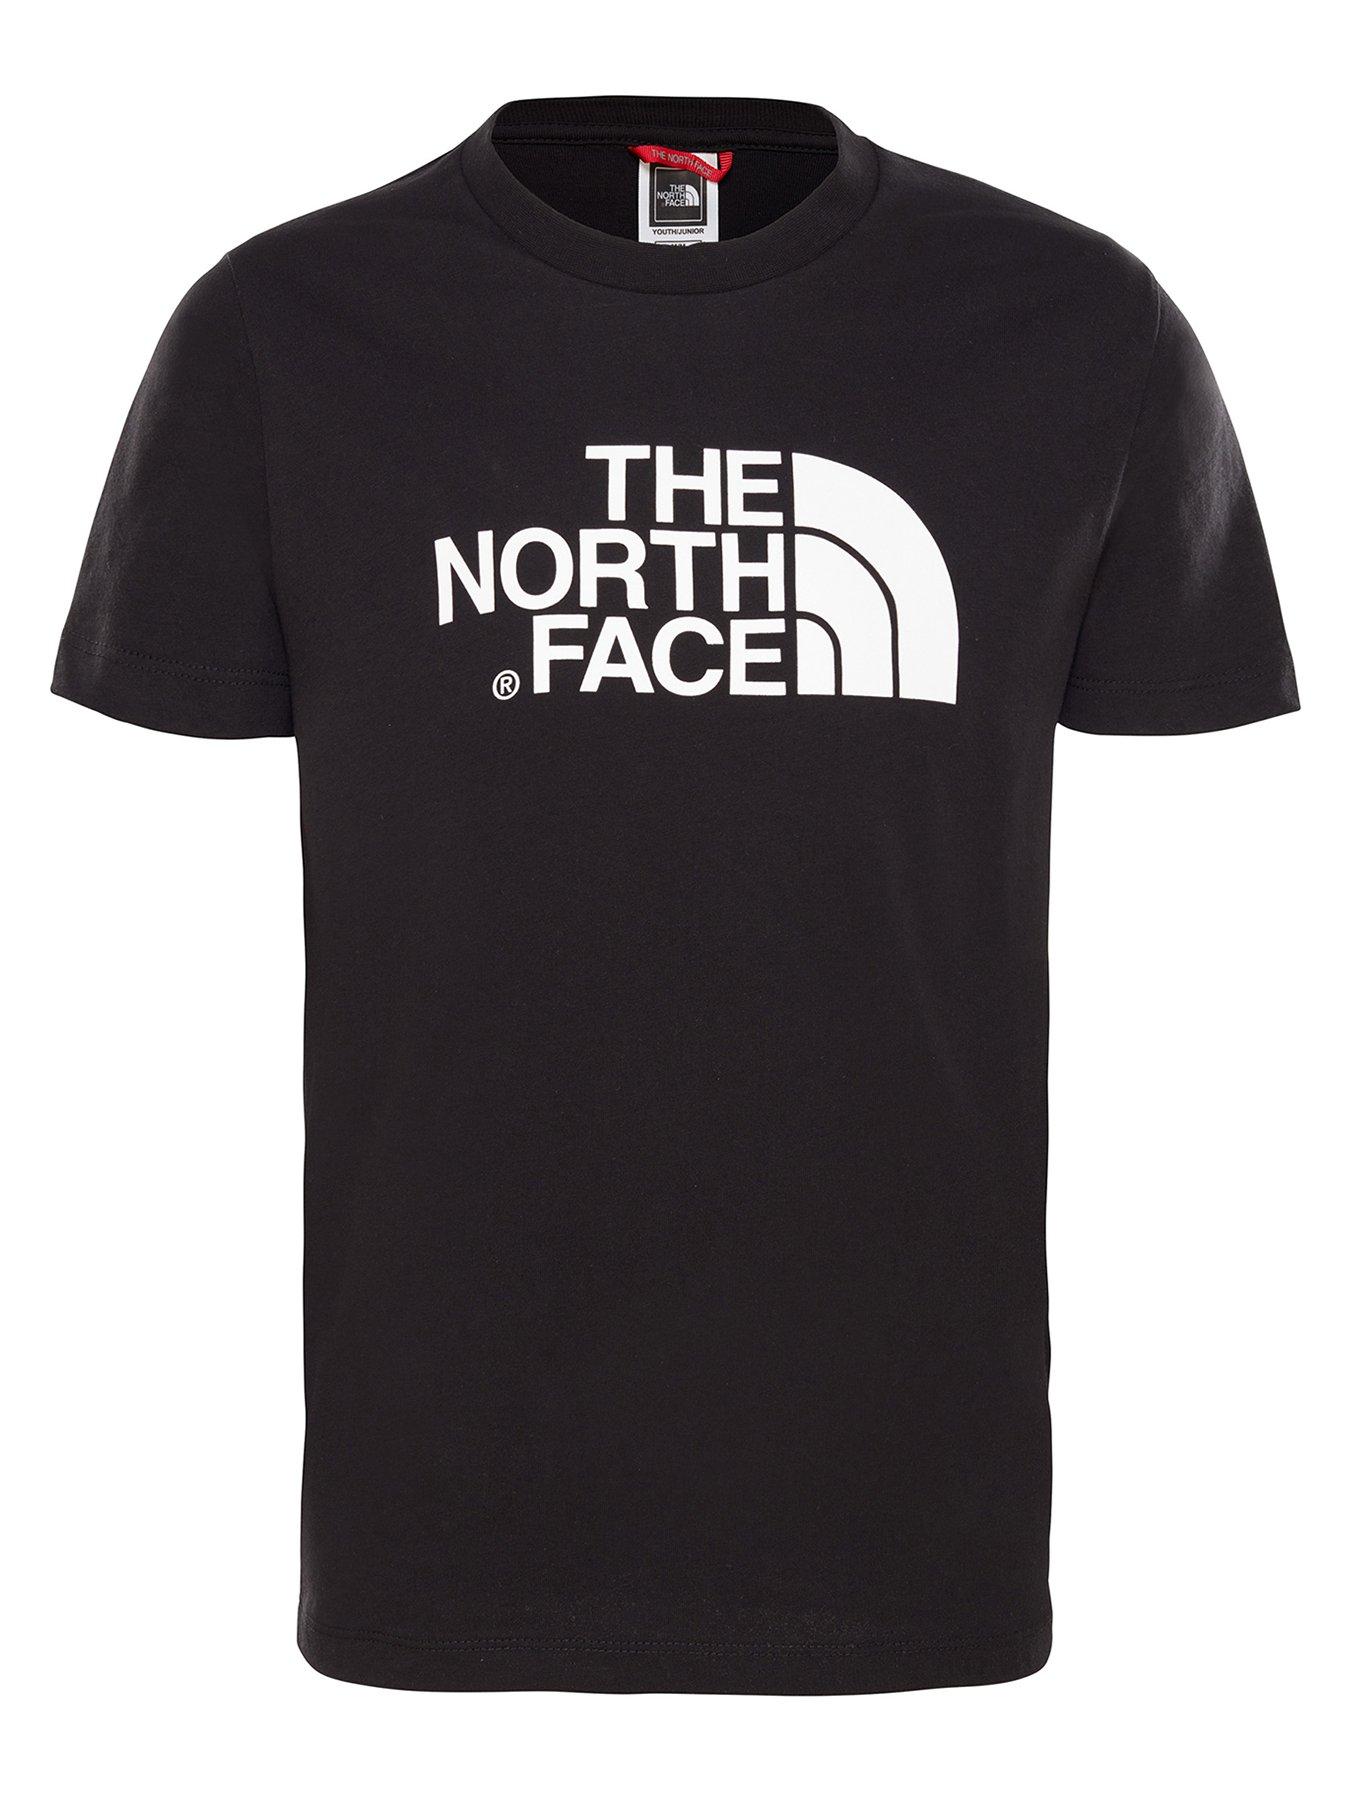 The North Face Boys Clothes 